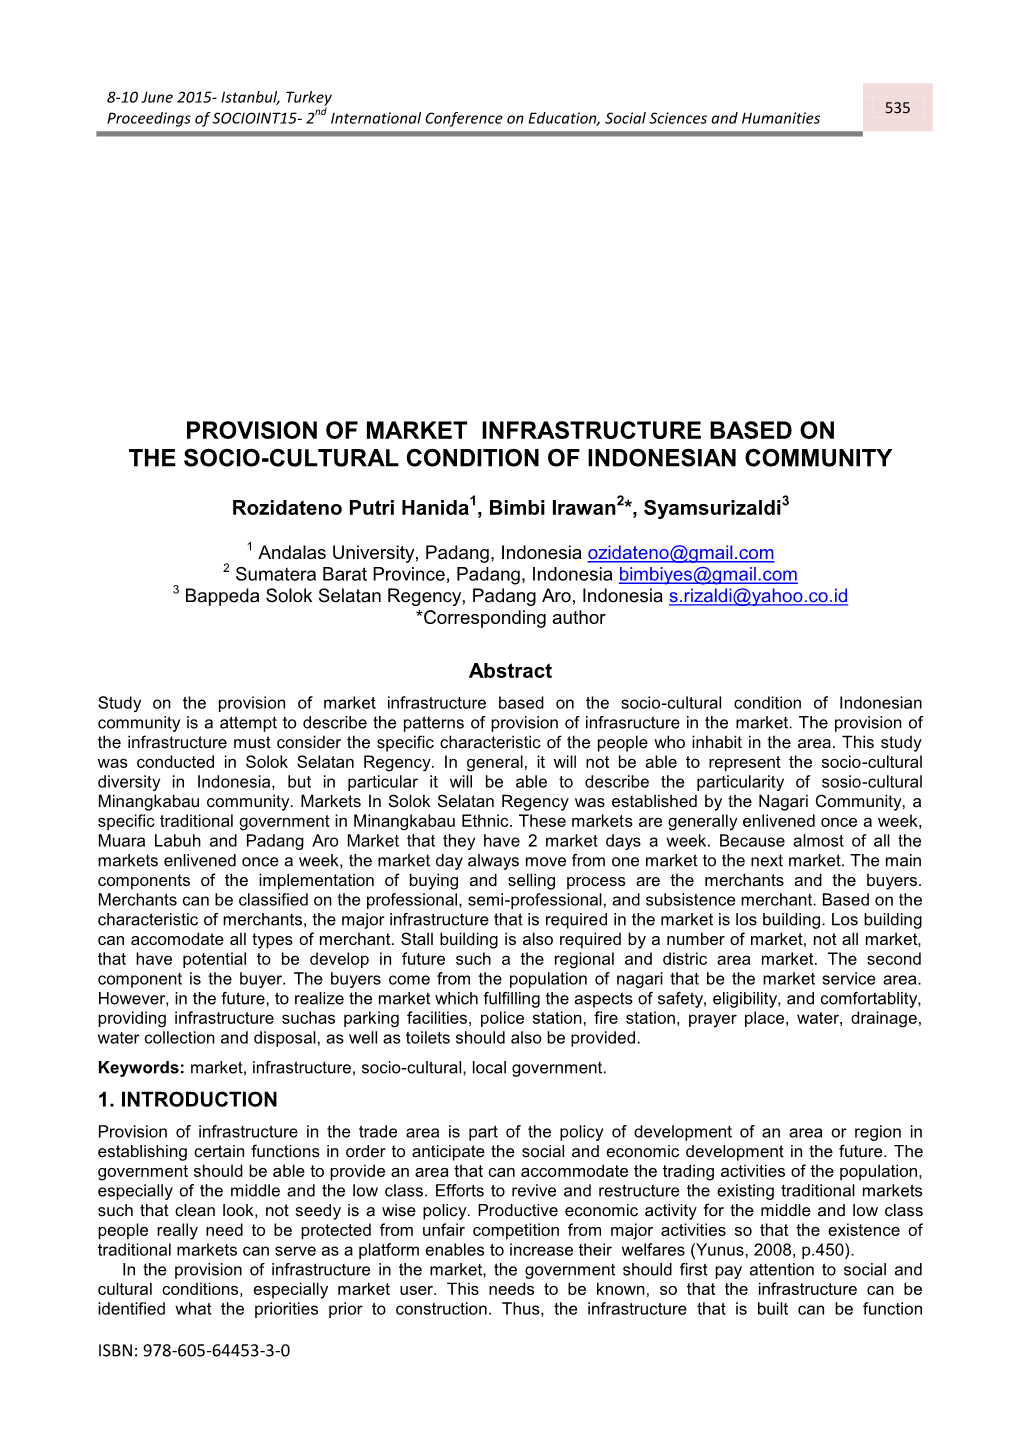 Provision of Market Infrastructure Based on the Socio-Cultural Condition of Indonesian Community